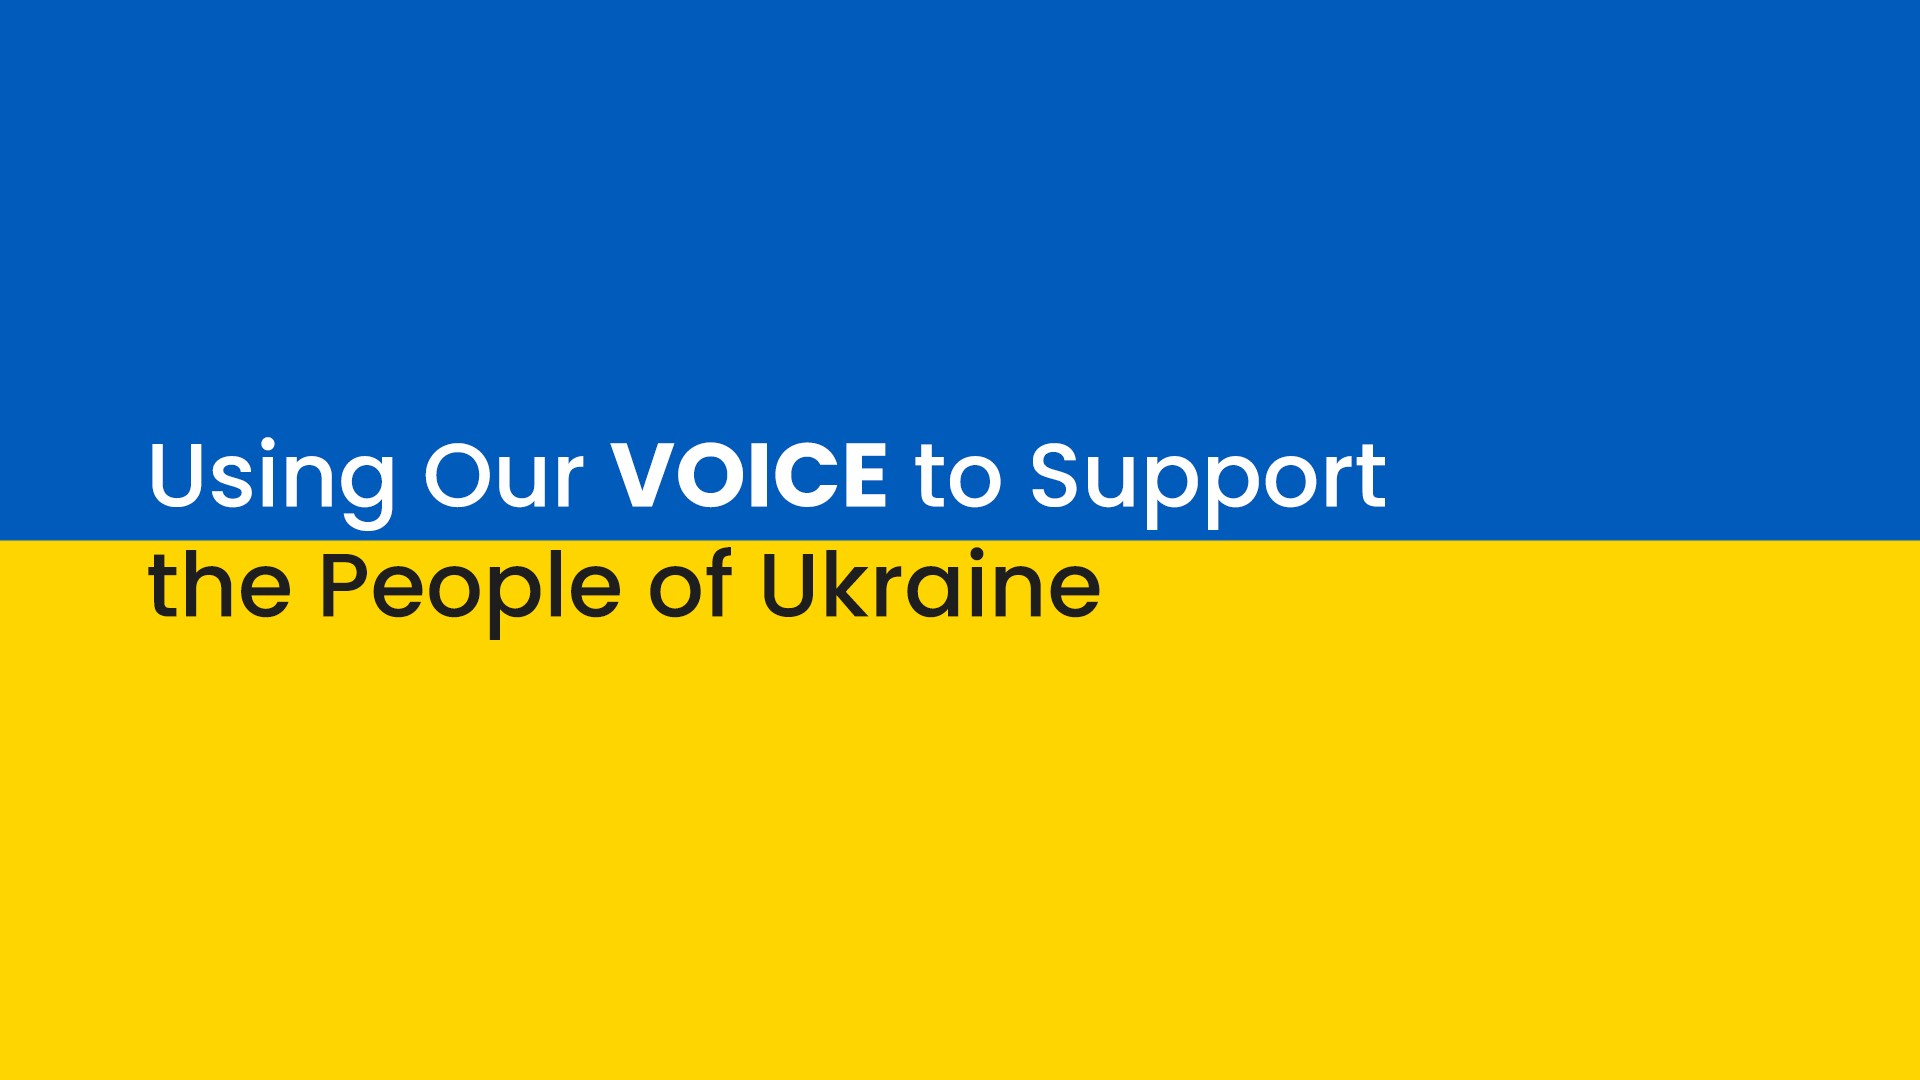 VOICE and Modev stand with the people of Ukraine